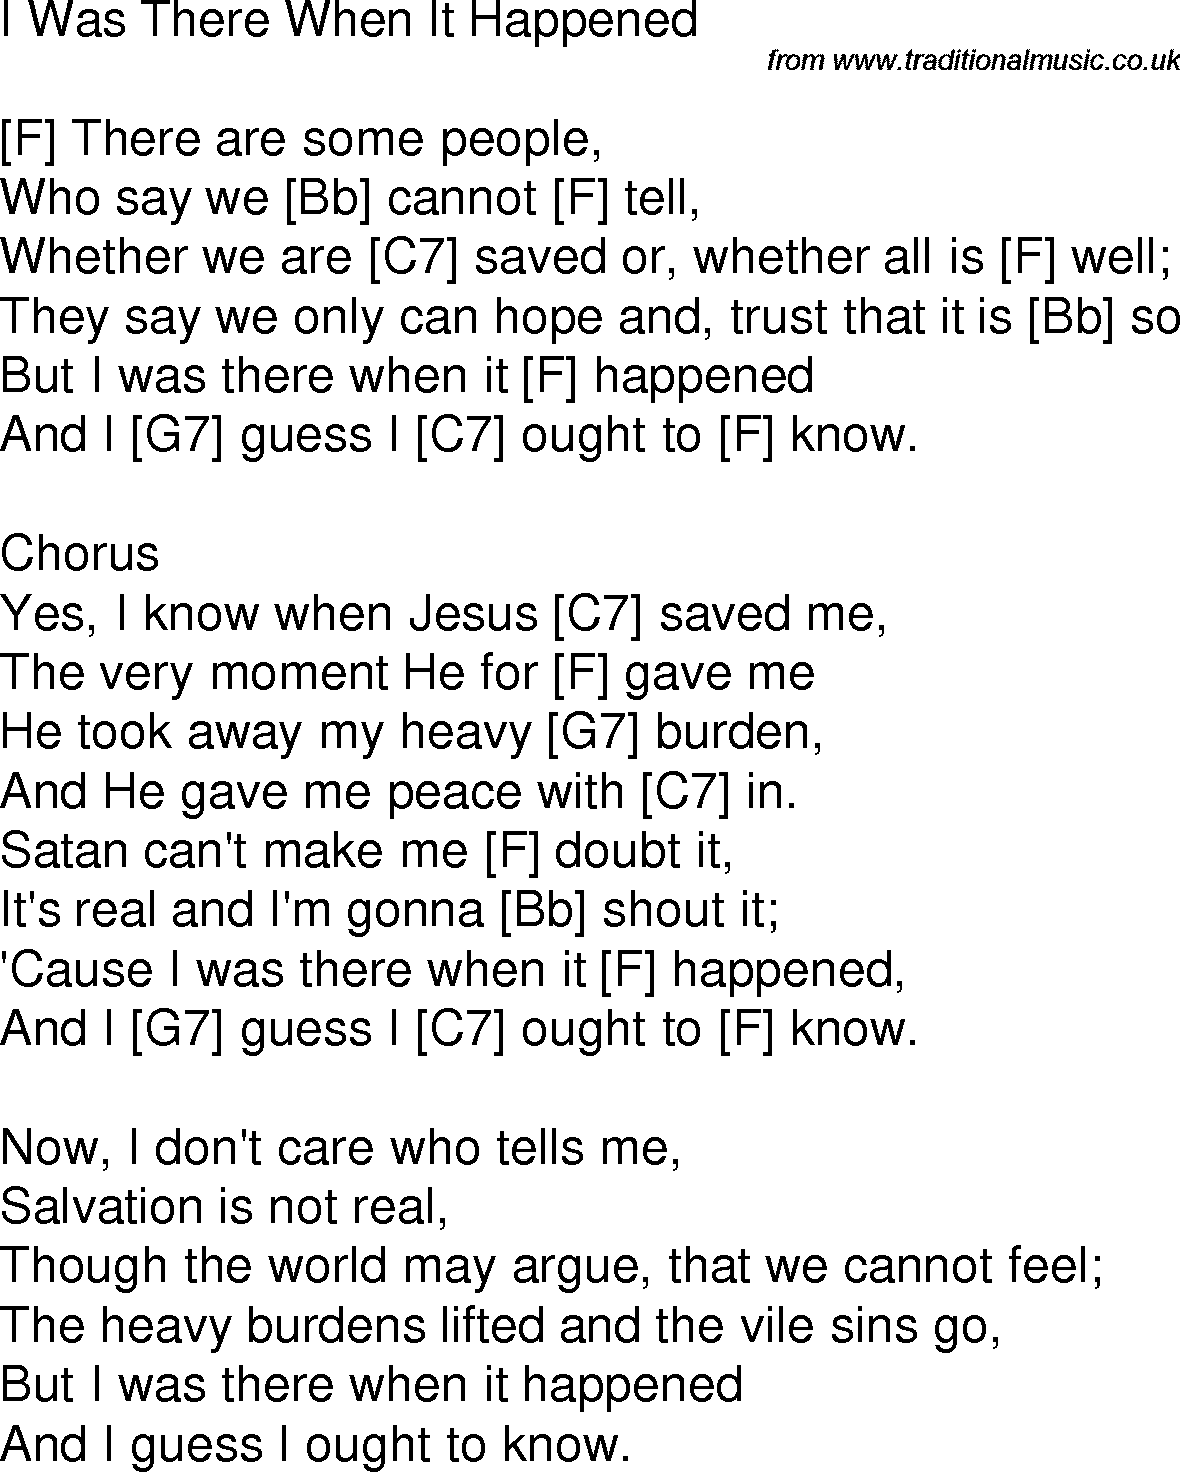 Old time song lyrics with chords for I Was There When It Happened F